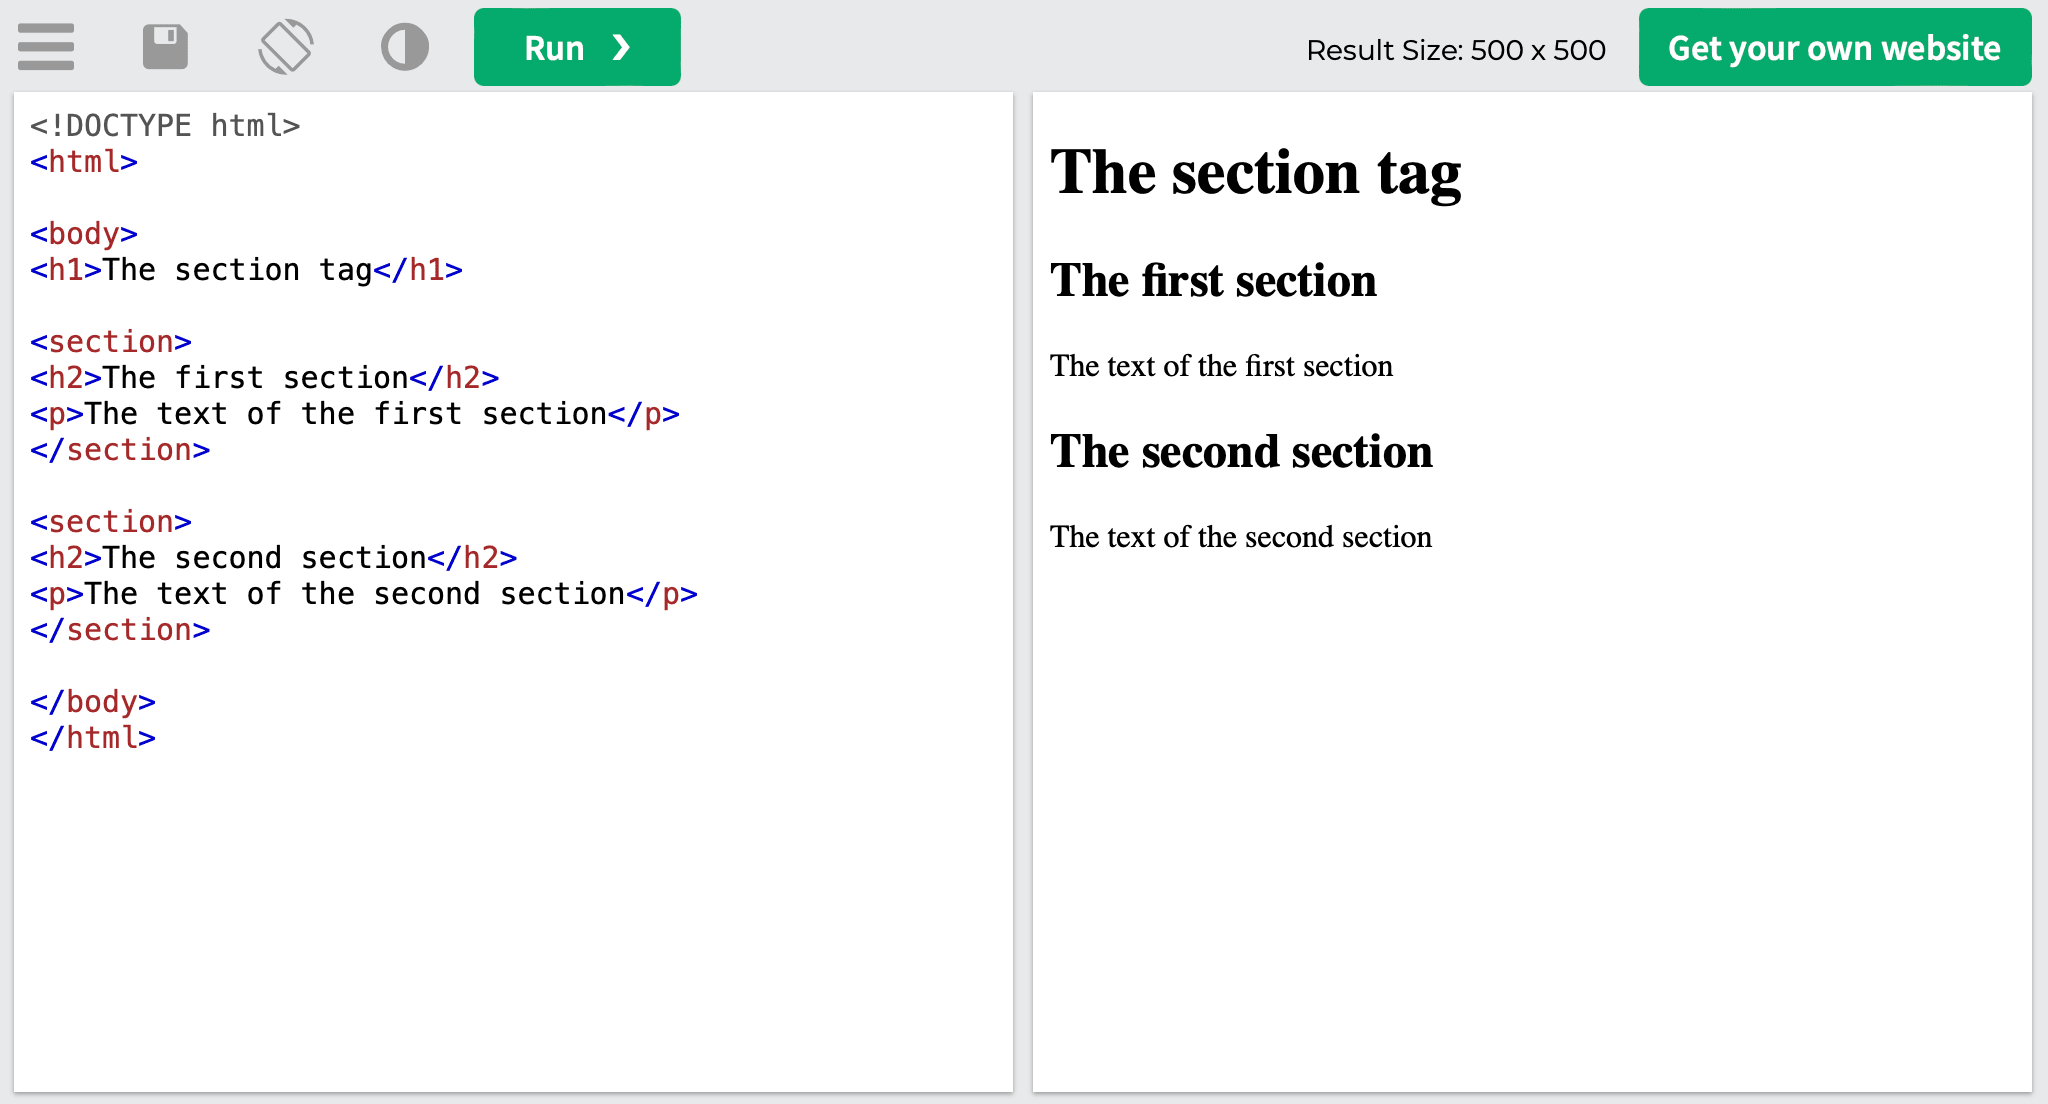 The <section> tag example